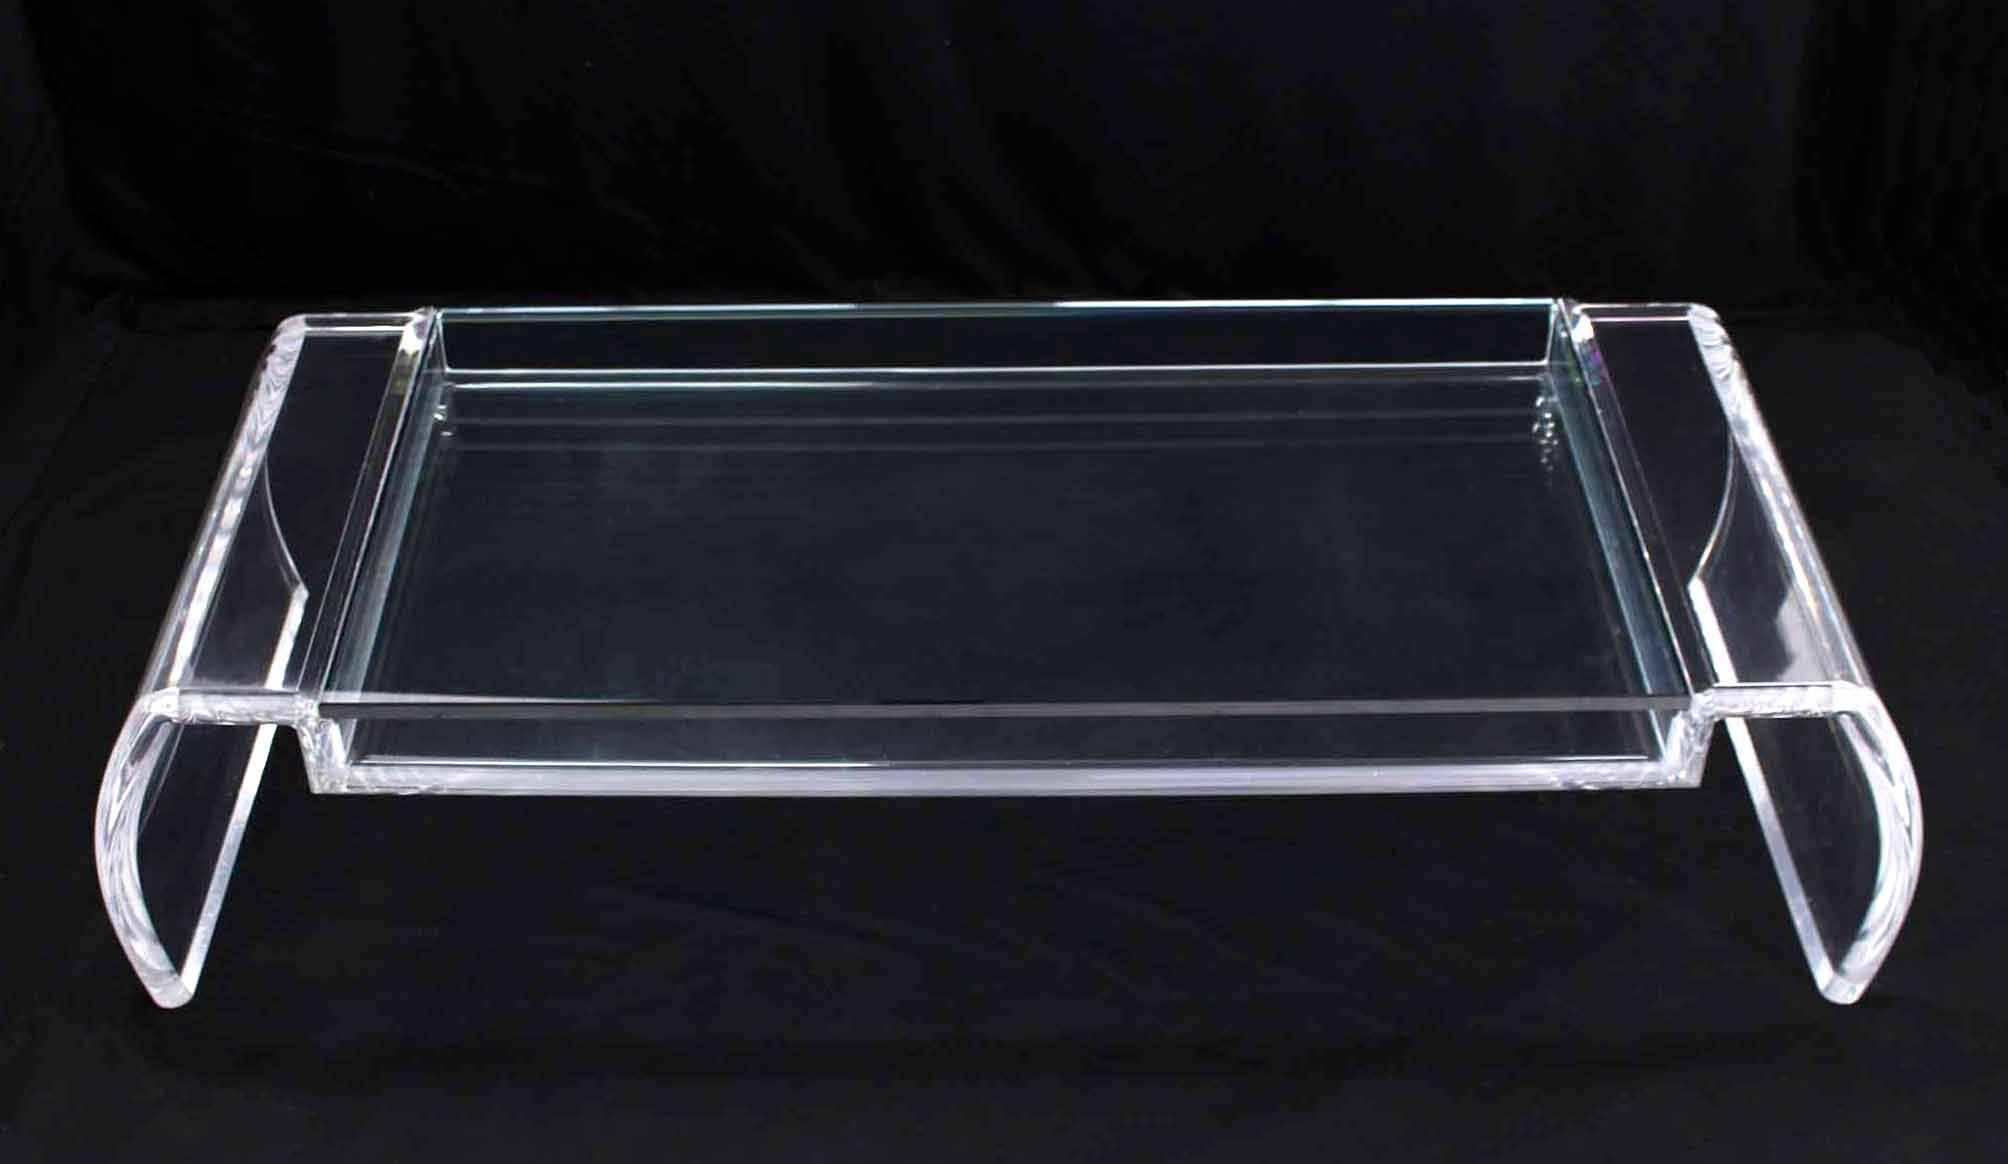 Artist Signed Sculptural Lucite Mid Century Modern Coffee Table Glass Top 1